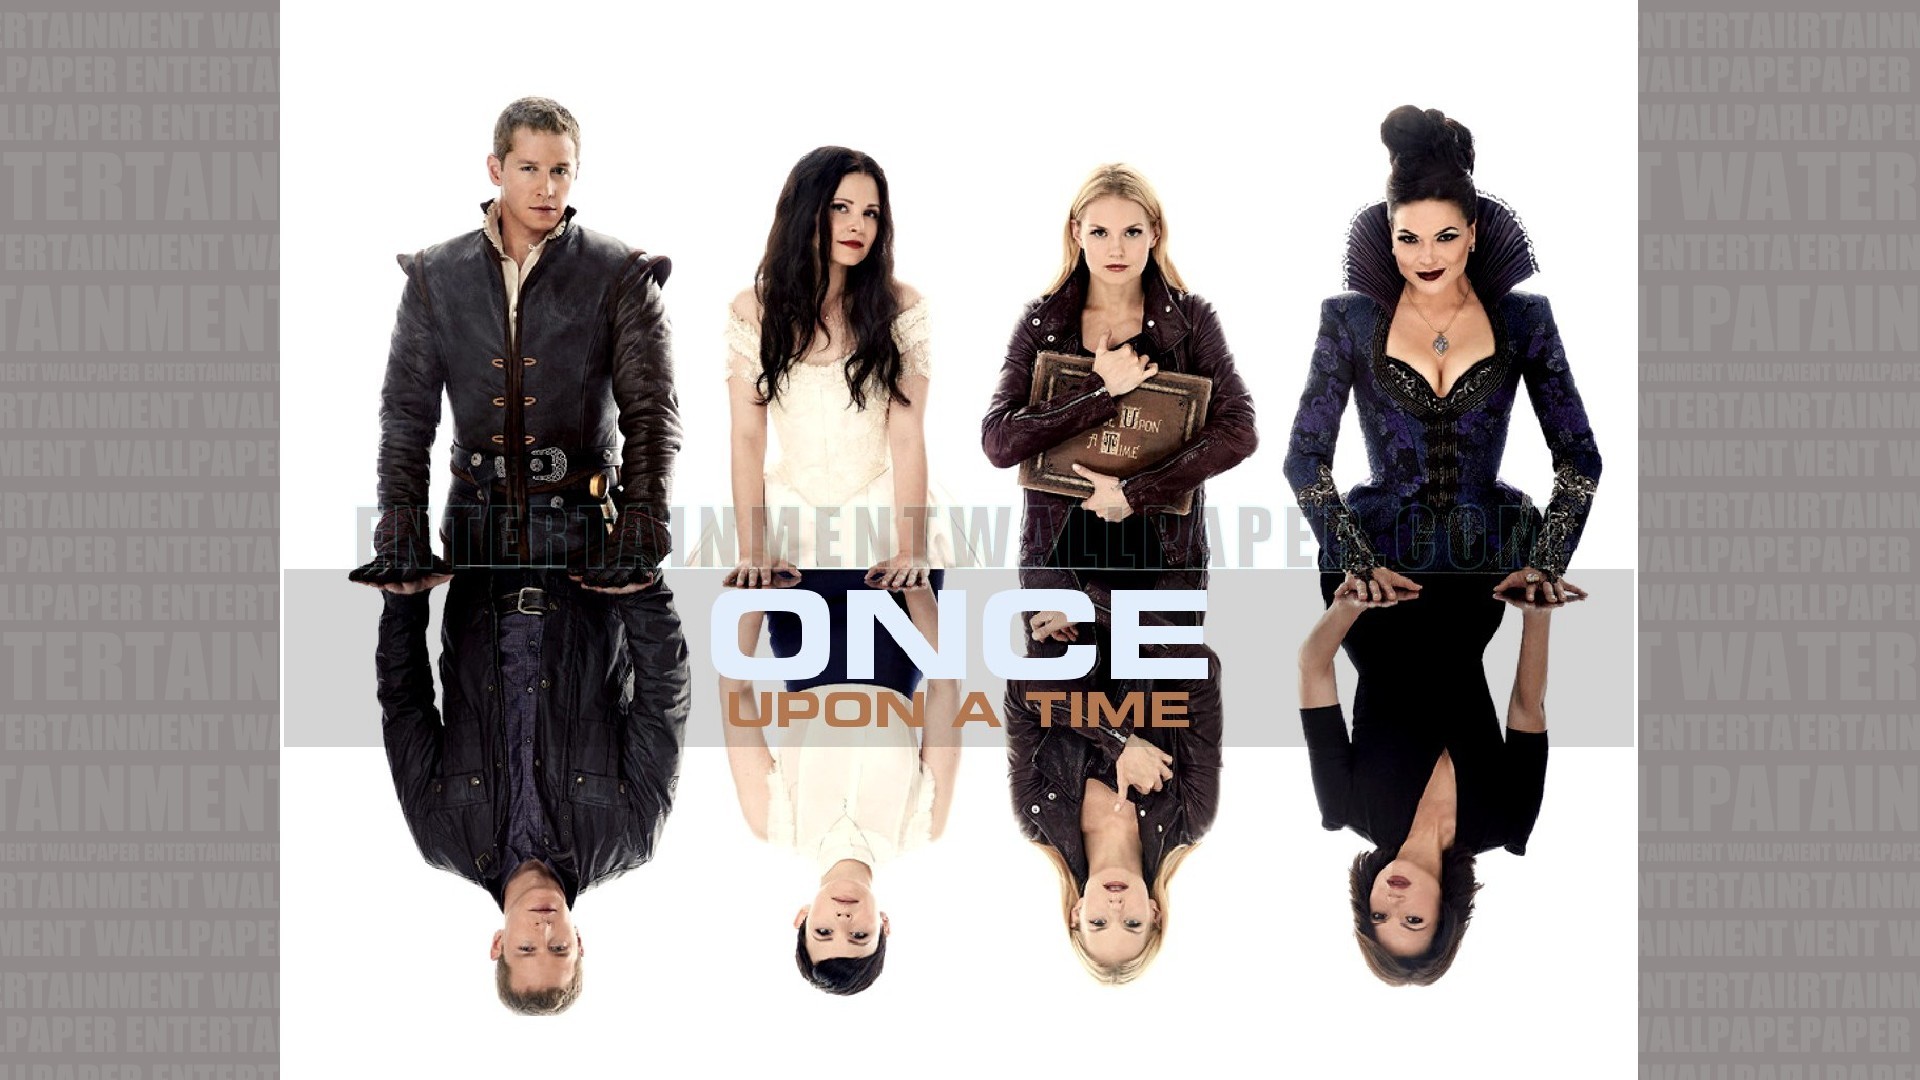 1920x1080 Once Upon a Time Wallpaper - Original size, download now.